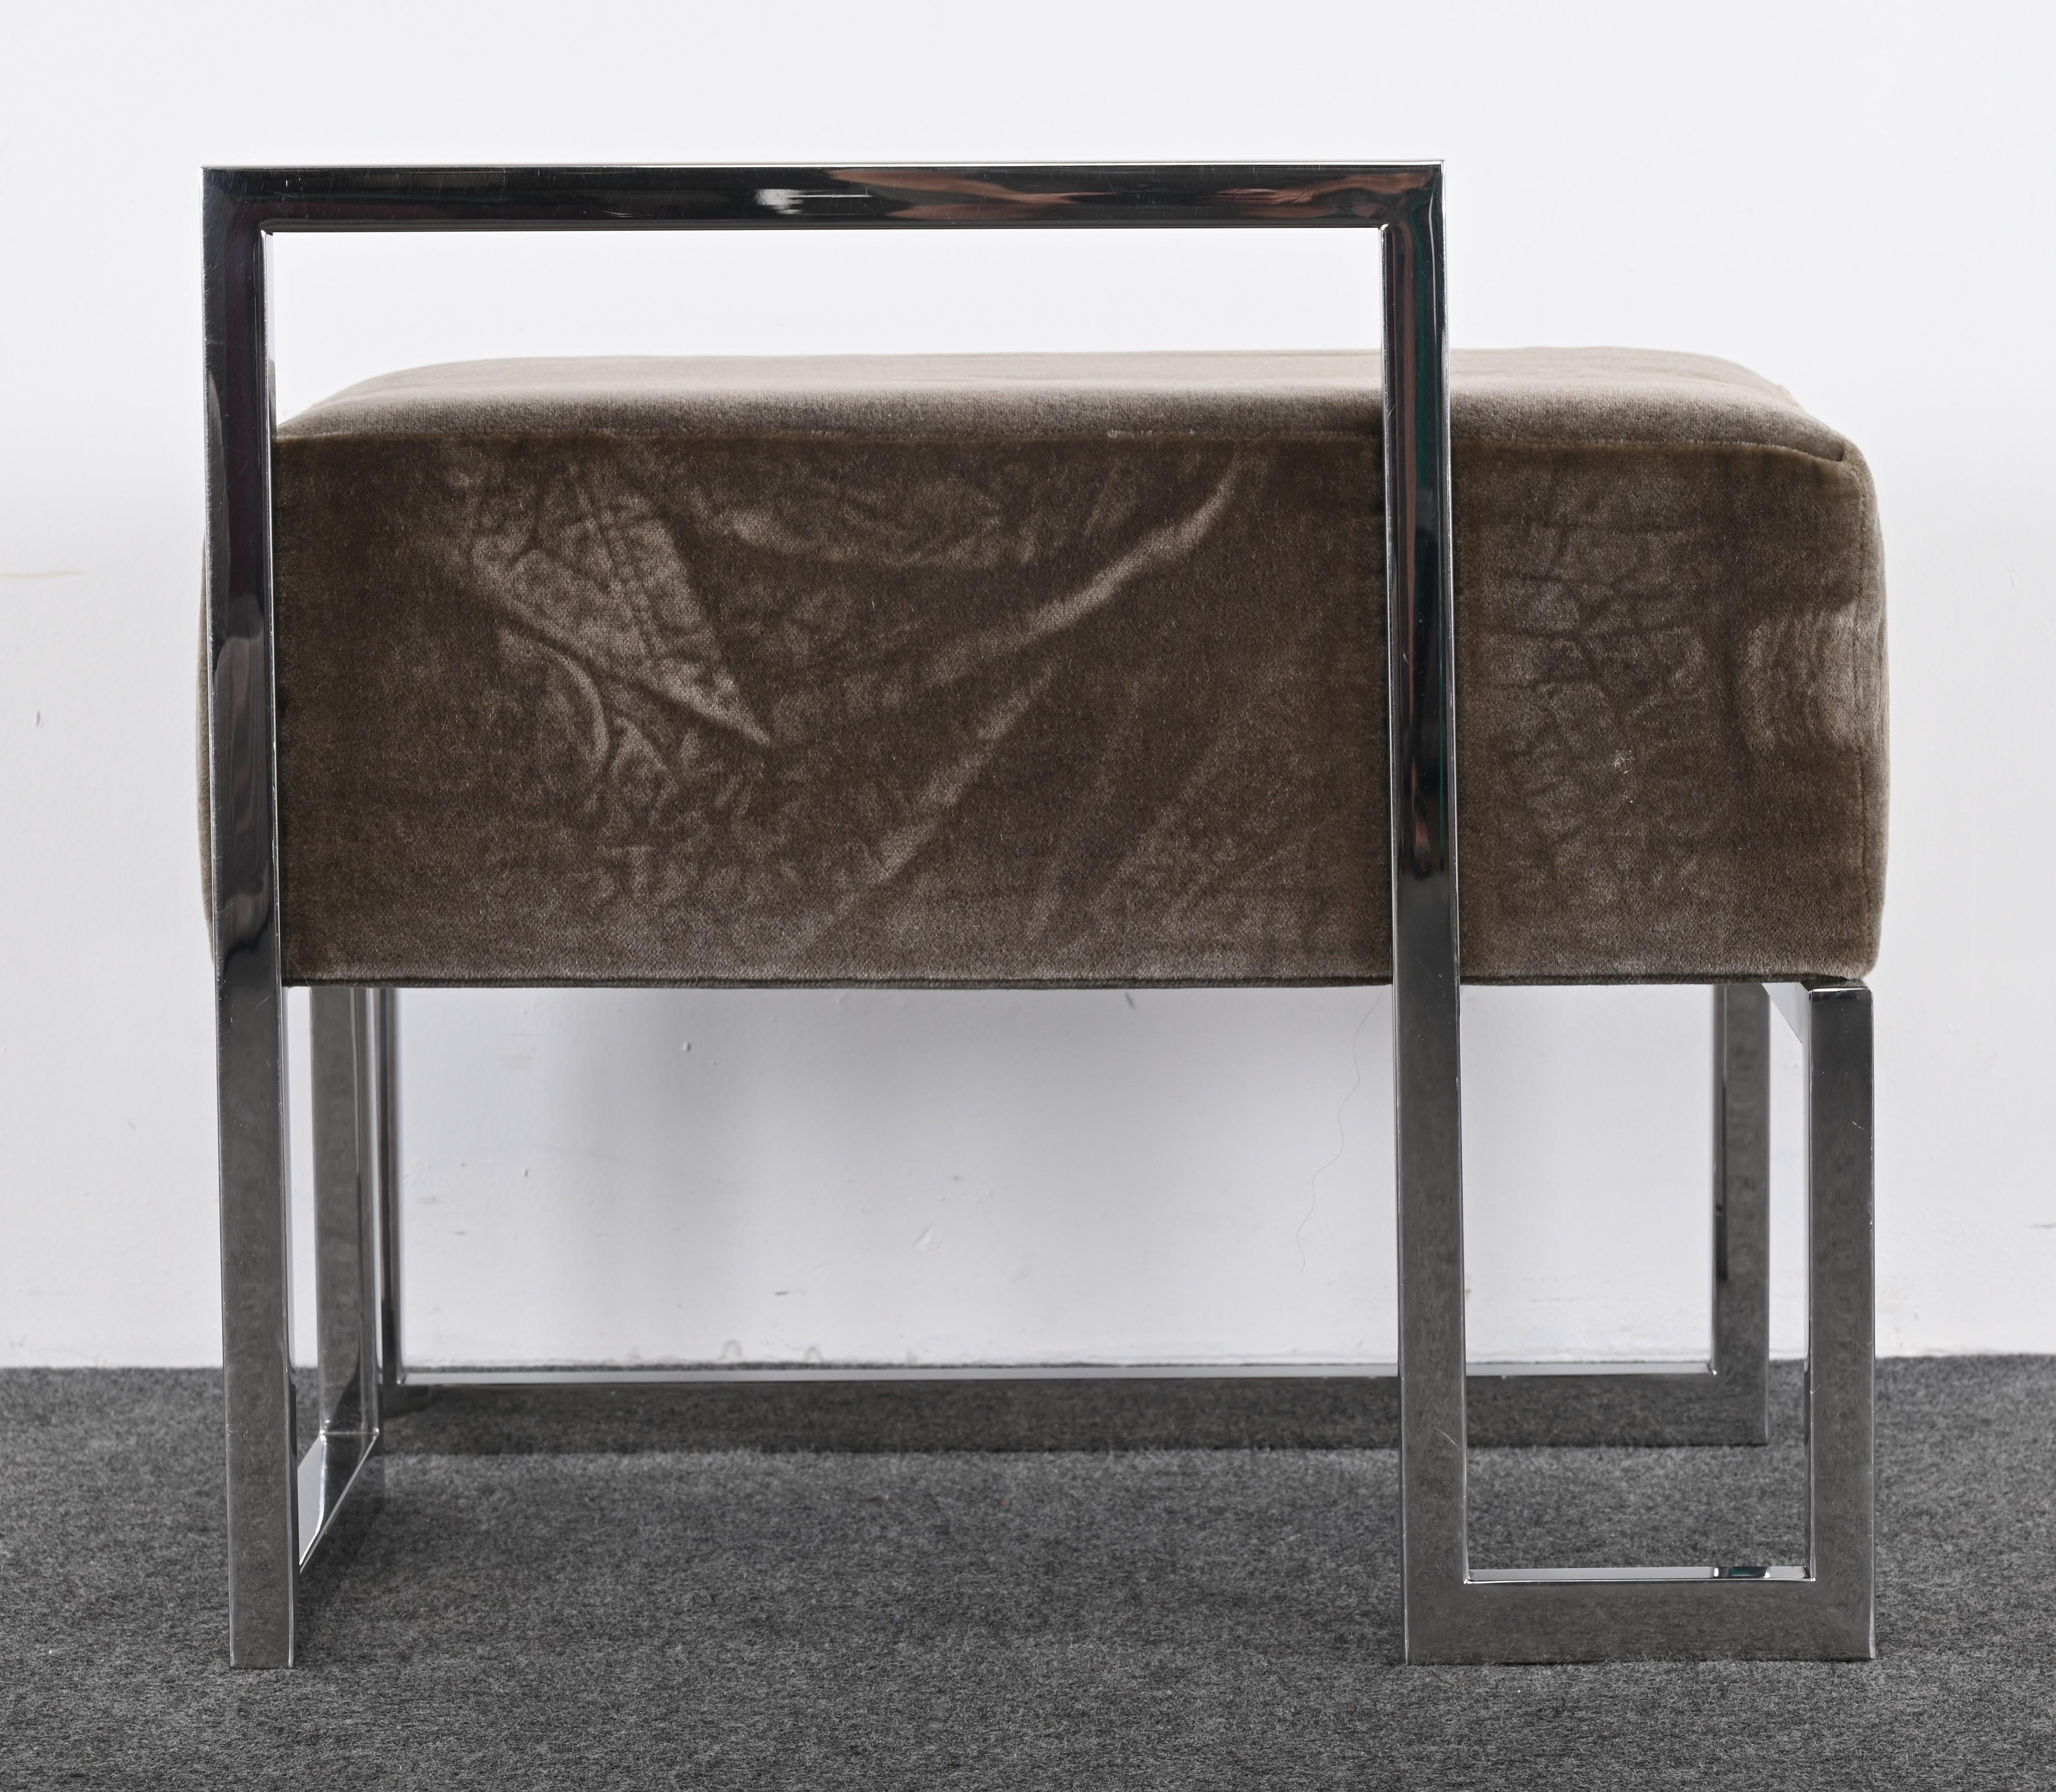 Late 20th Century Stainless Steel Bench by Vladimir Kagan for Gucci, 1990s For Sale